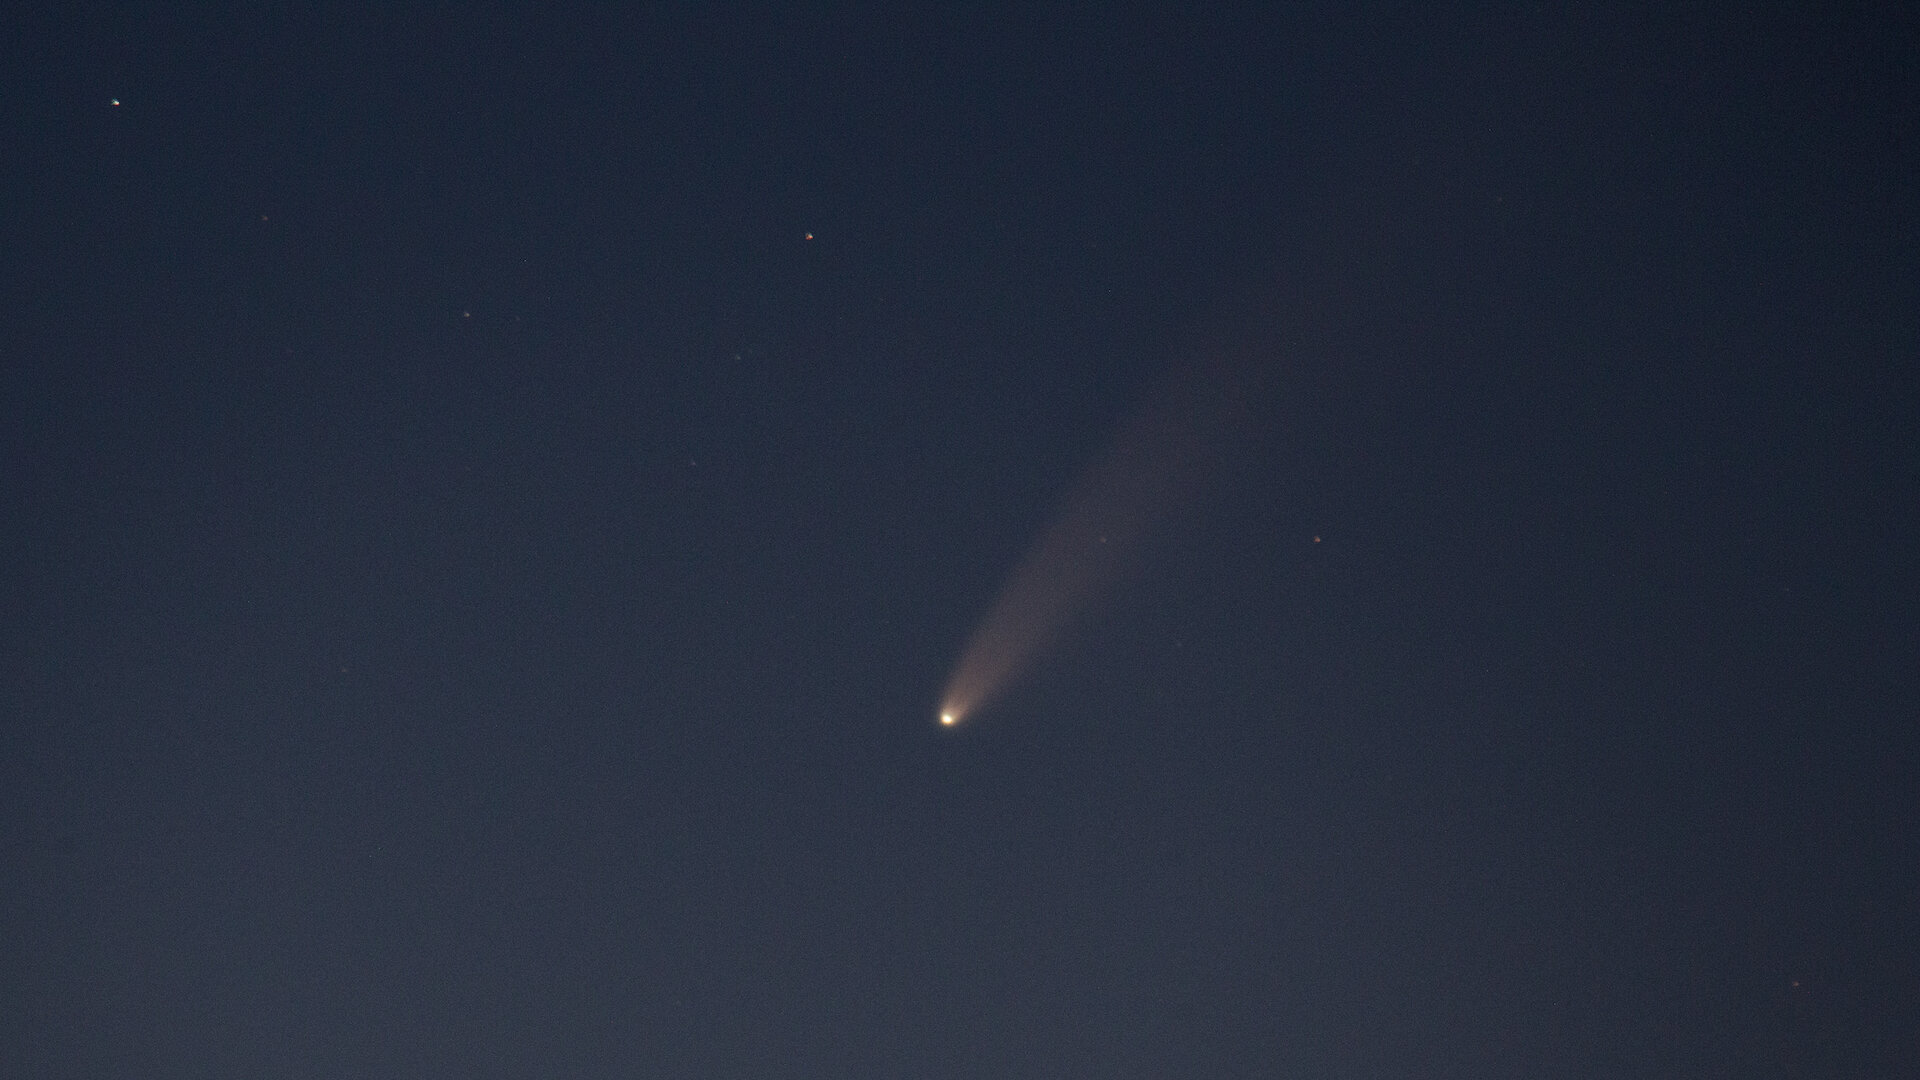  It was still fairly light around 10:00 p.m. but you could see the long tail! 